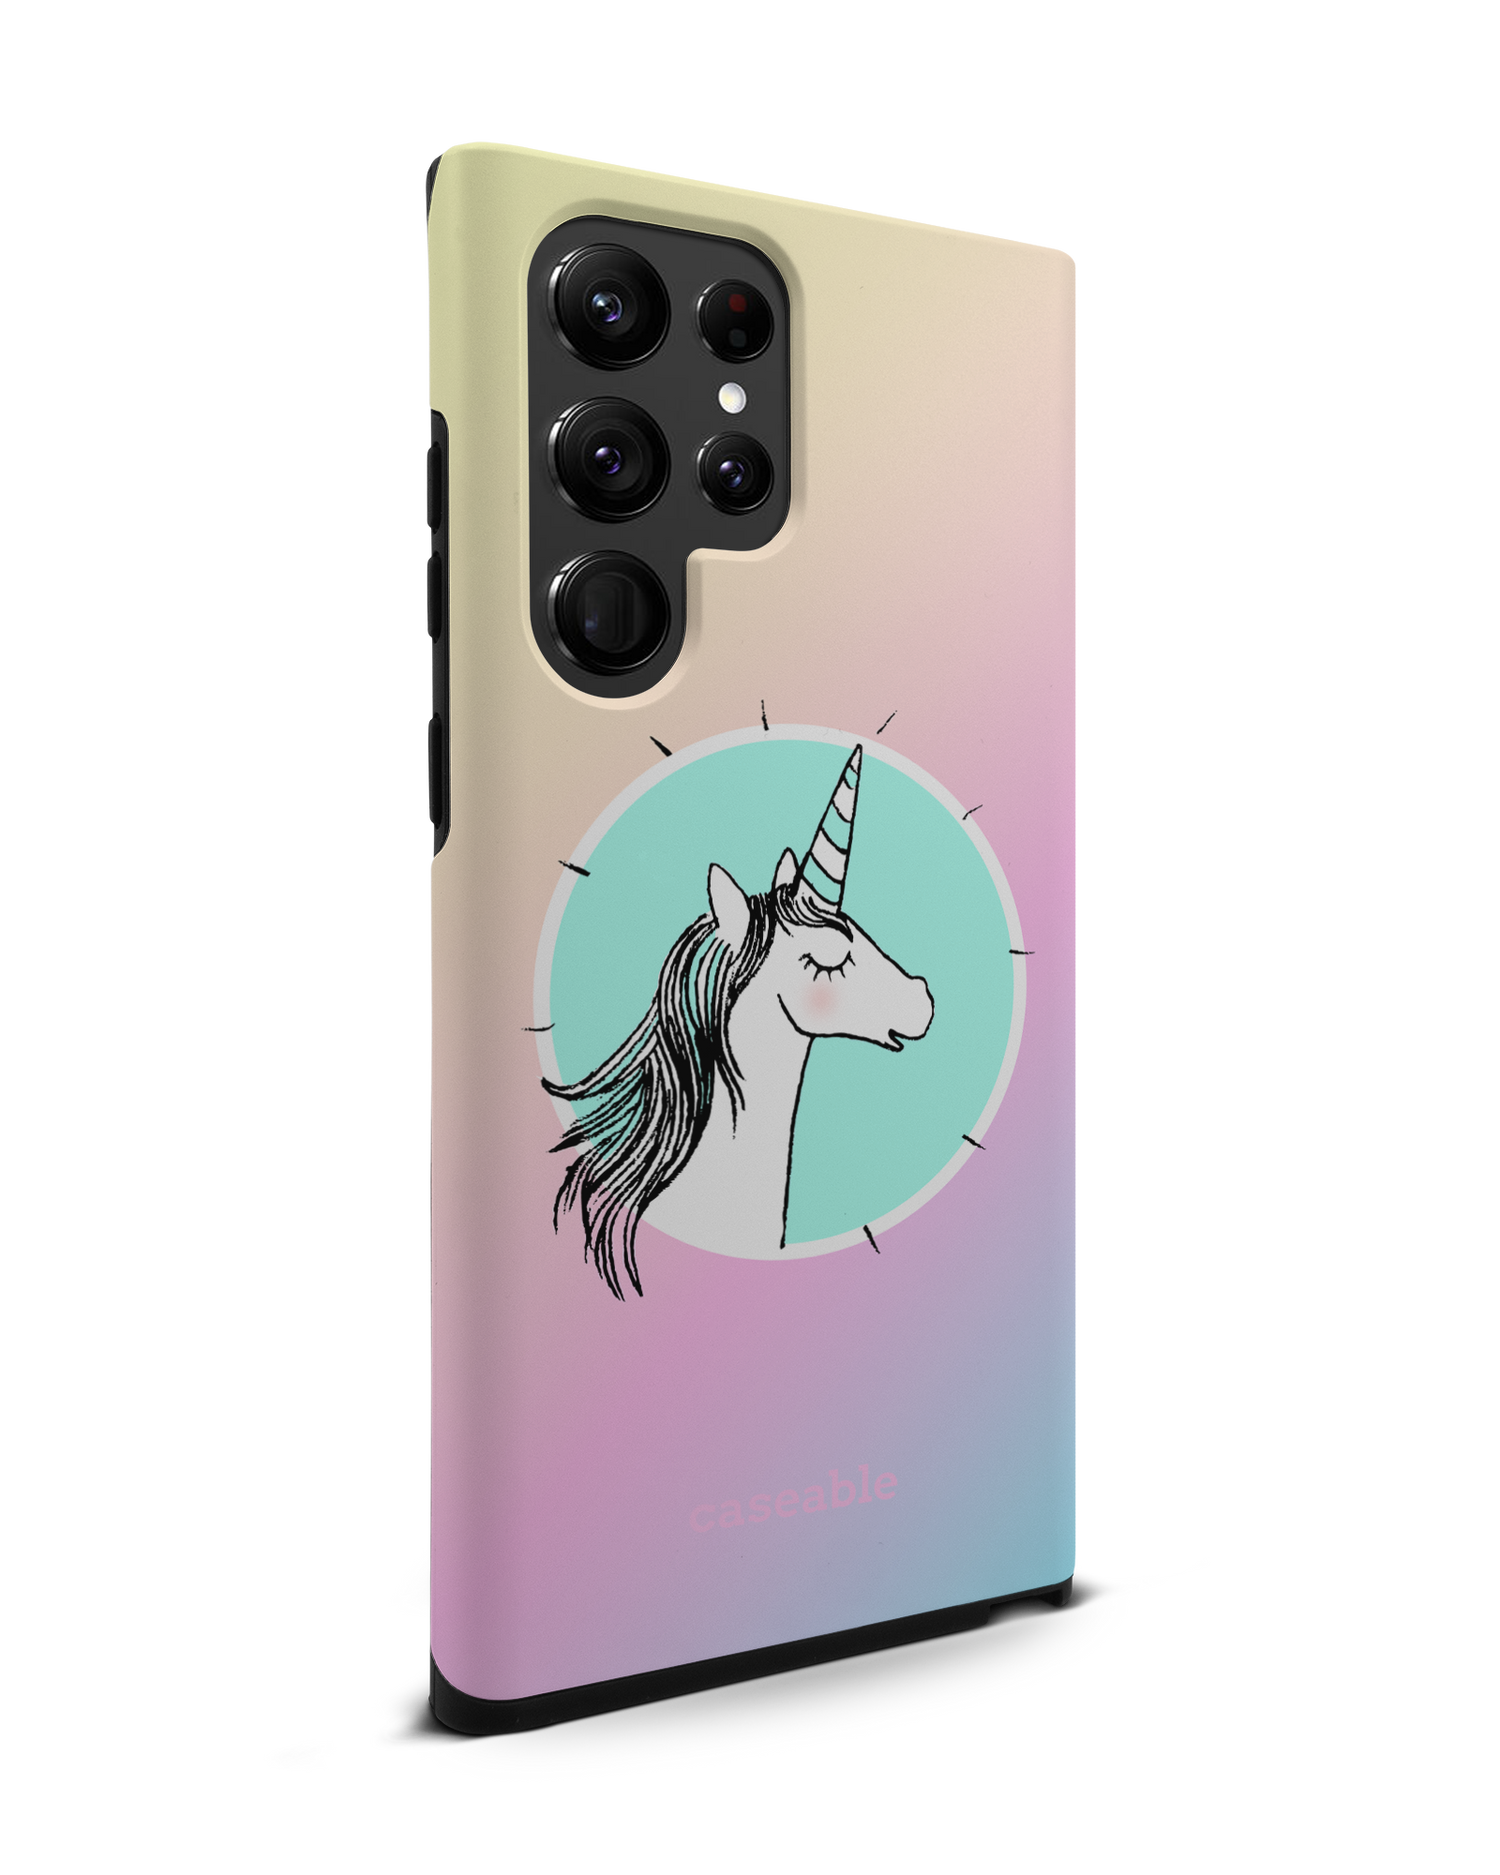 Happiness Unicorn Premium Phone Case Samsung Galaxy S22 Ultra 5G: View from the left side